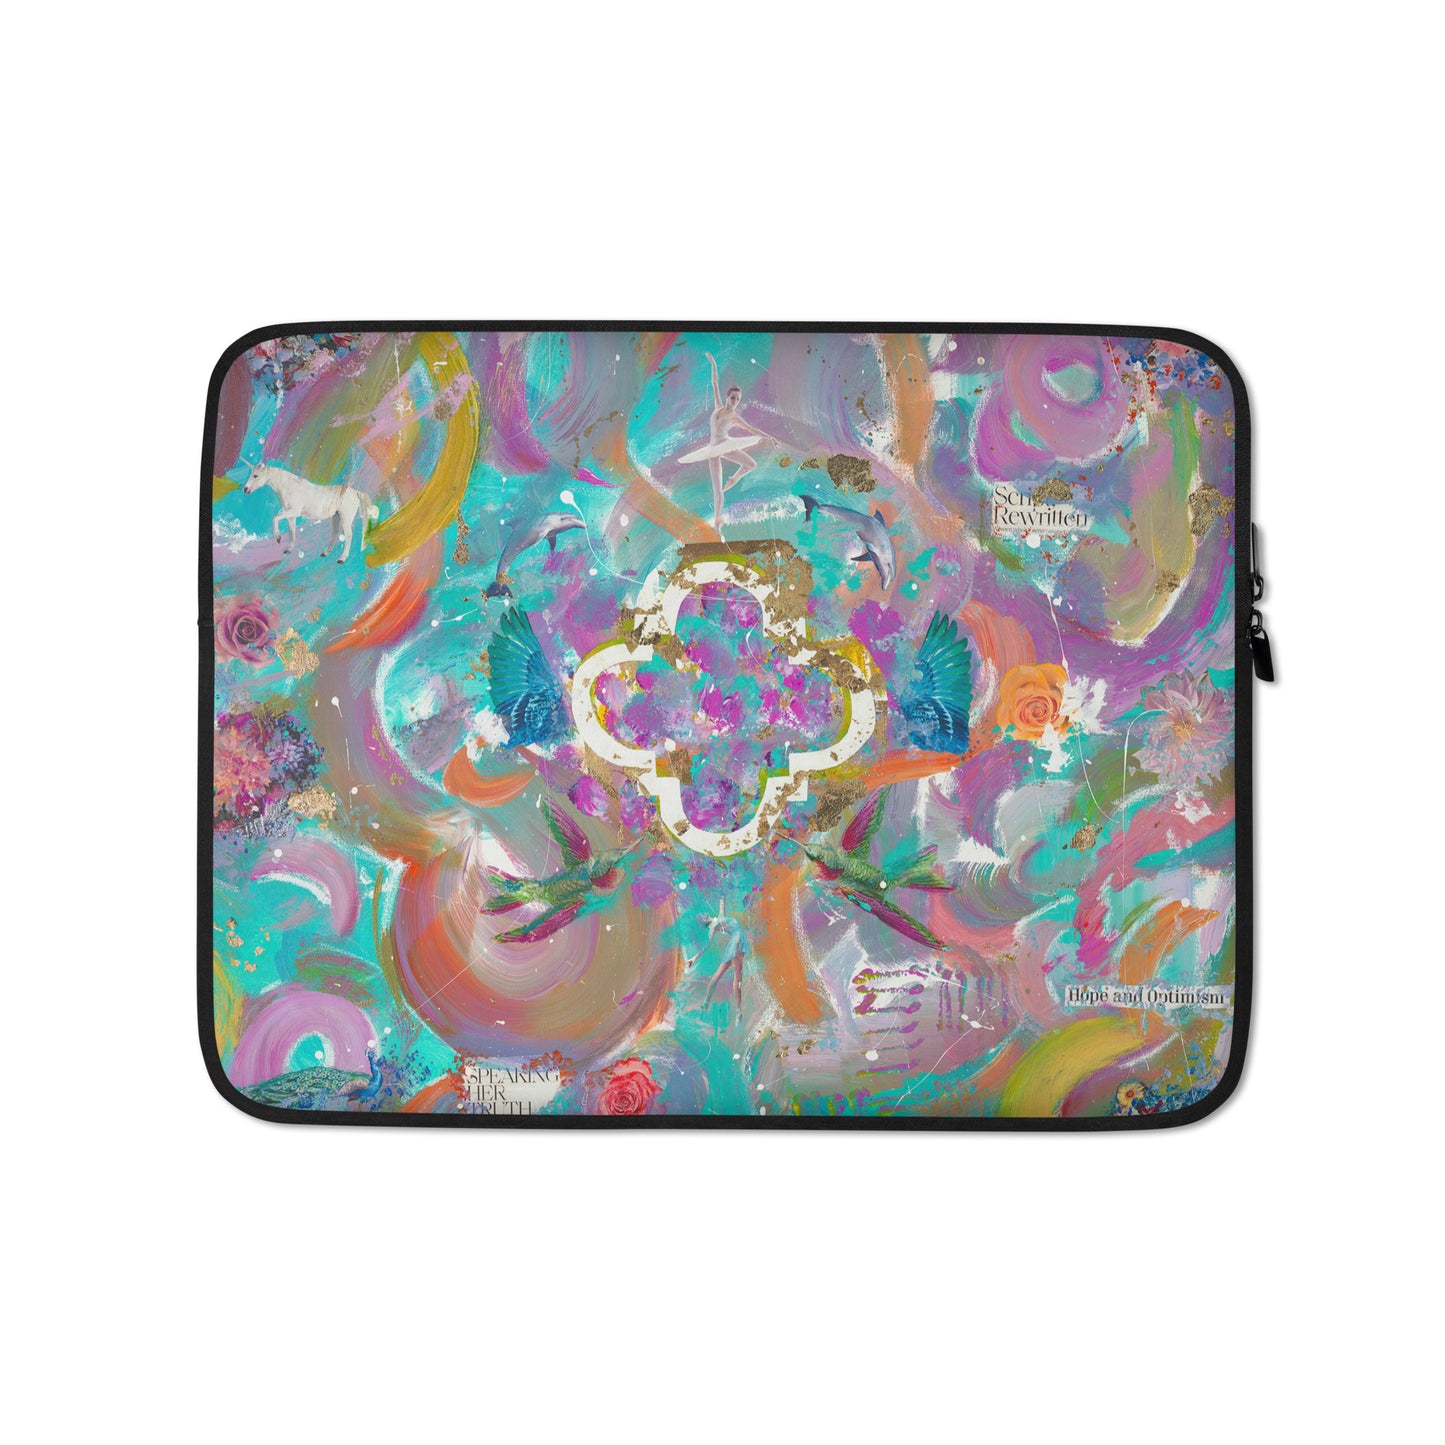 "TRULY FREE" Print (Abstract Painting made by Chianne) LAPTOP SLEEVE